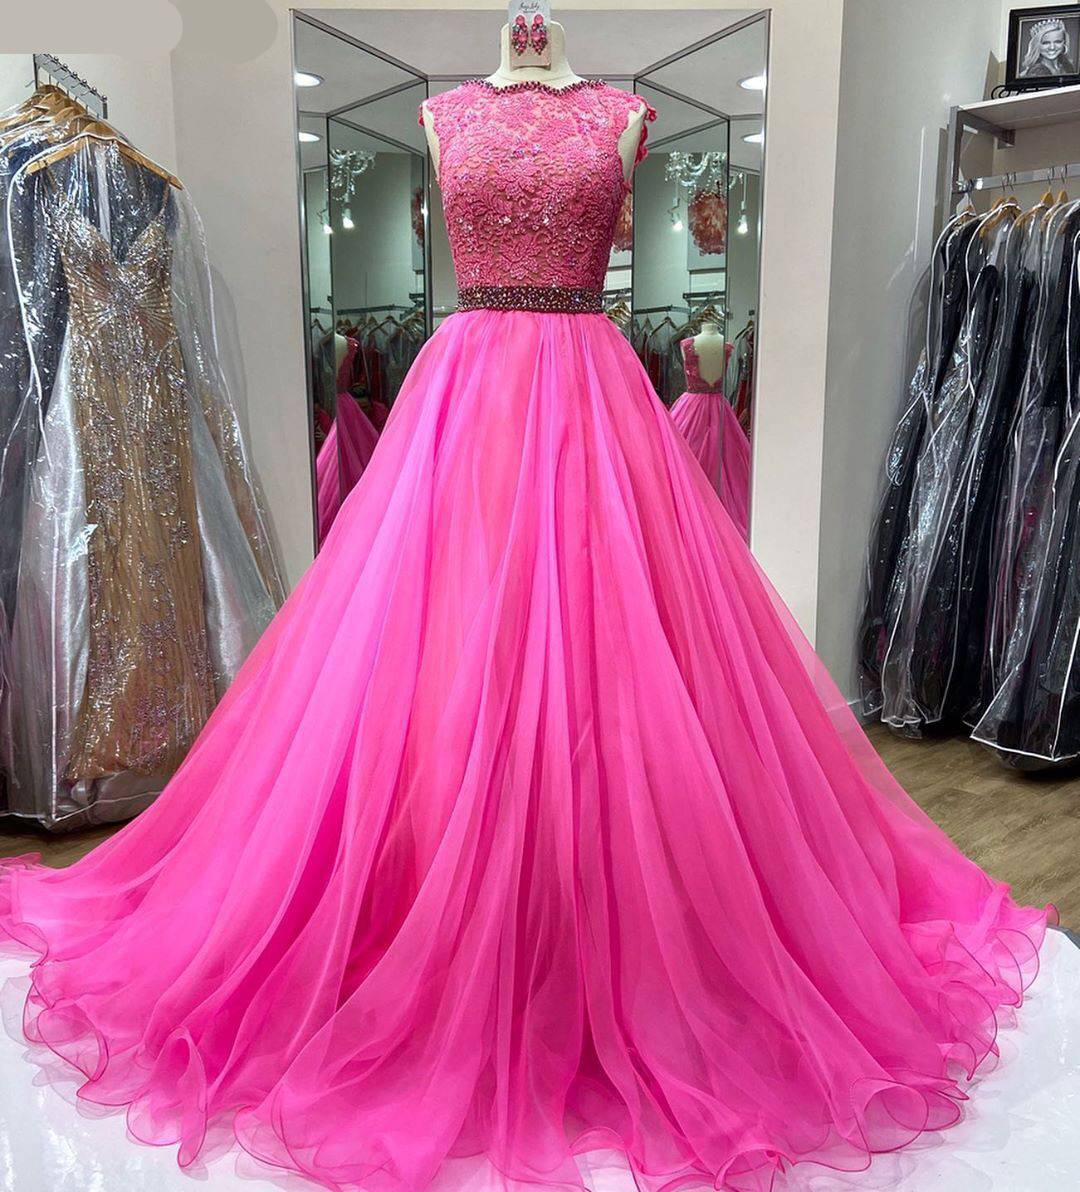 Girl's Fashion Sleeveless Prom Dress Aussieprom: online-only Formal & Bridesmaid Color : Rose|Black|Blue|Gray|Green|Pink|Purple|Red|White|Yellow|Champagne 